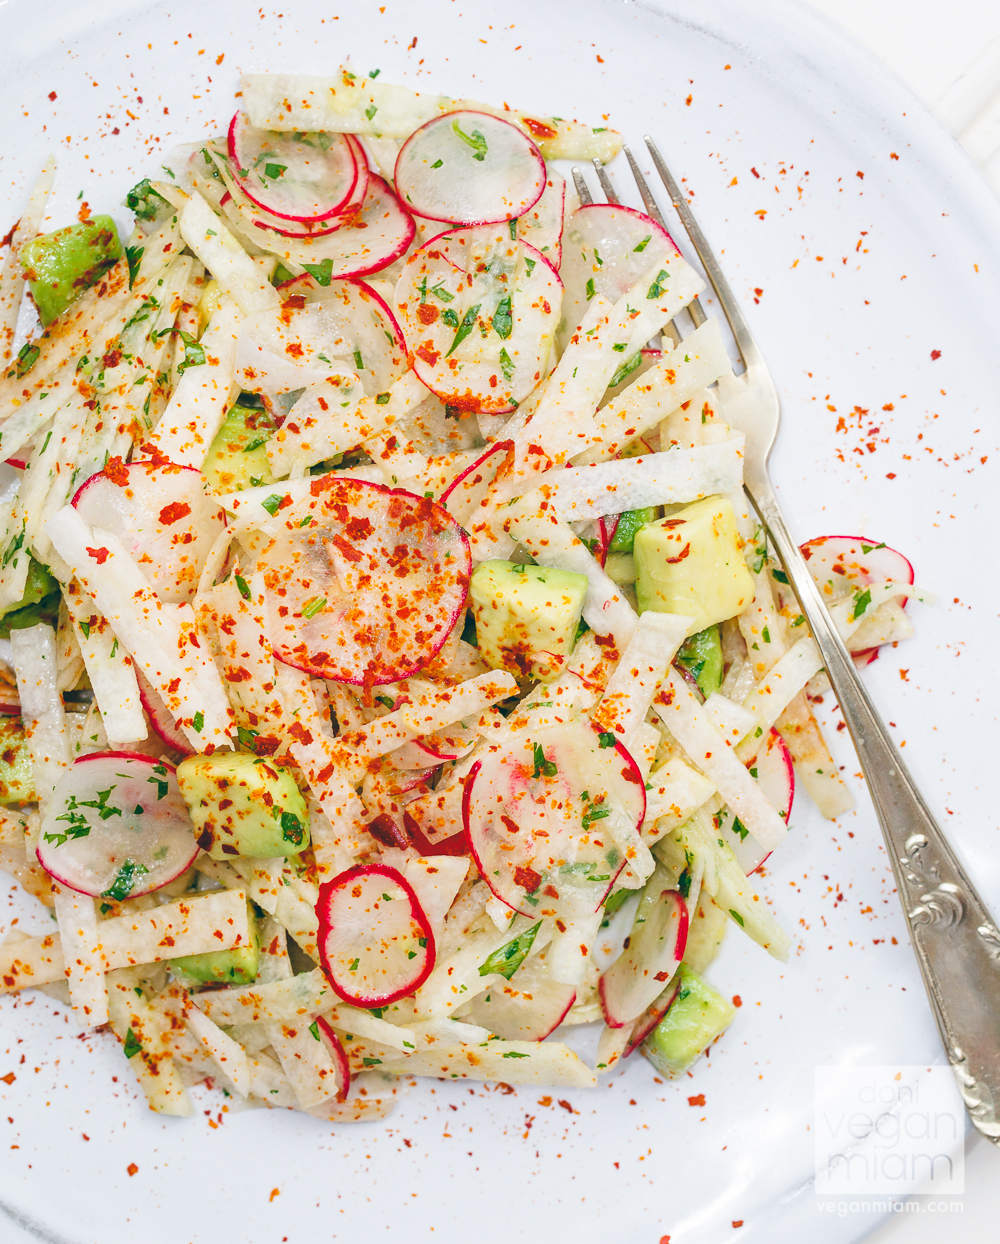 A refreshing Jicama Avocado and Radish Salad with Lime Vinaigrette with great texture and flavor, that comes together quickly and easily. Vegan